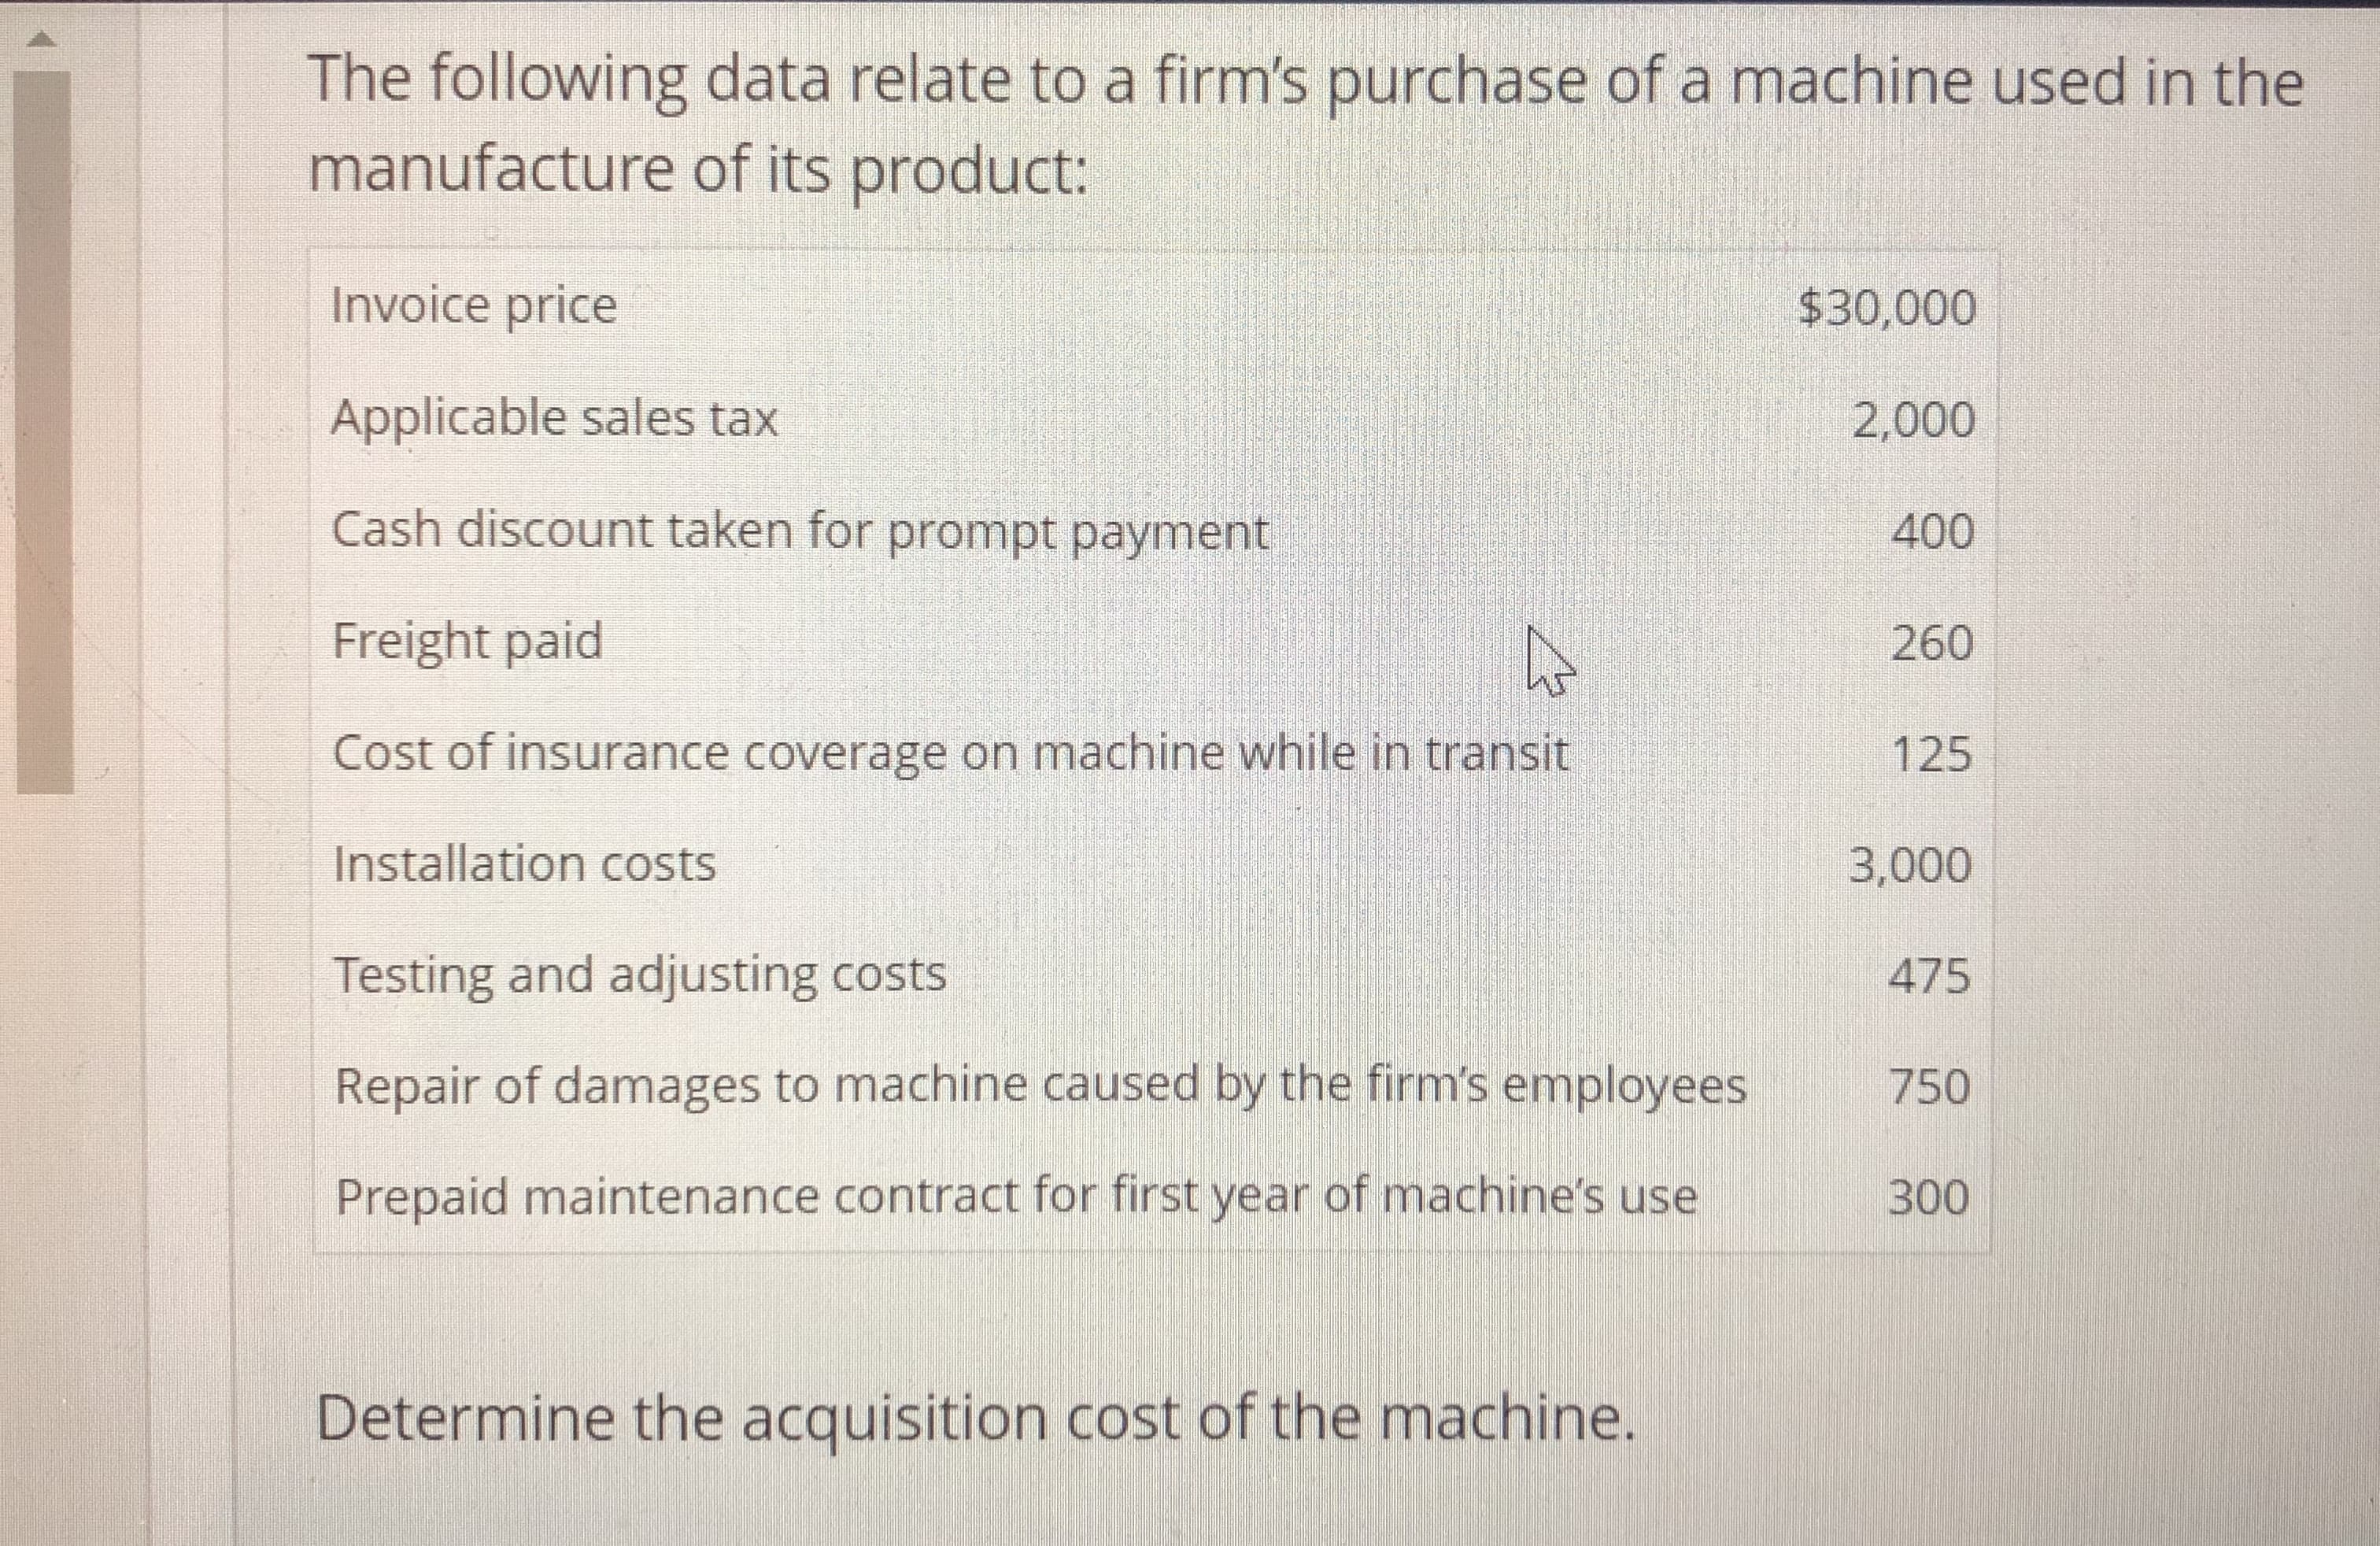 The following data relate to a firm's purchase of a machine used in the
manufacture of its product:
Invoice price
Applicable sales tax
Cash discount taken for prompt payment
Freight paid
Cost of insurance coverage on machine while in transit
Installation costs
Testing and adjusting costs
Repair of damages to machine caused by the firm's employees750
Prepaid maintenance contract for first year of machine's use
$30,000
2,000
400
260
125
3,000
475
300
Determine the acquisition cost of the machine.
